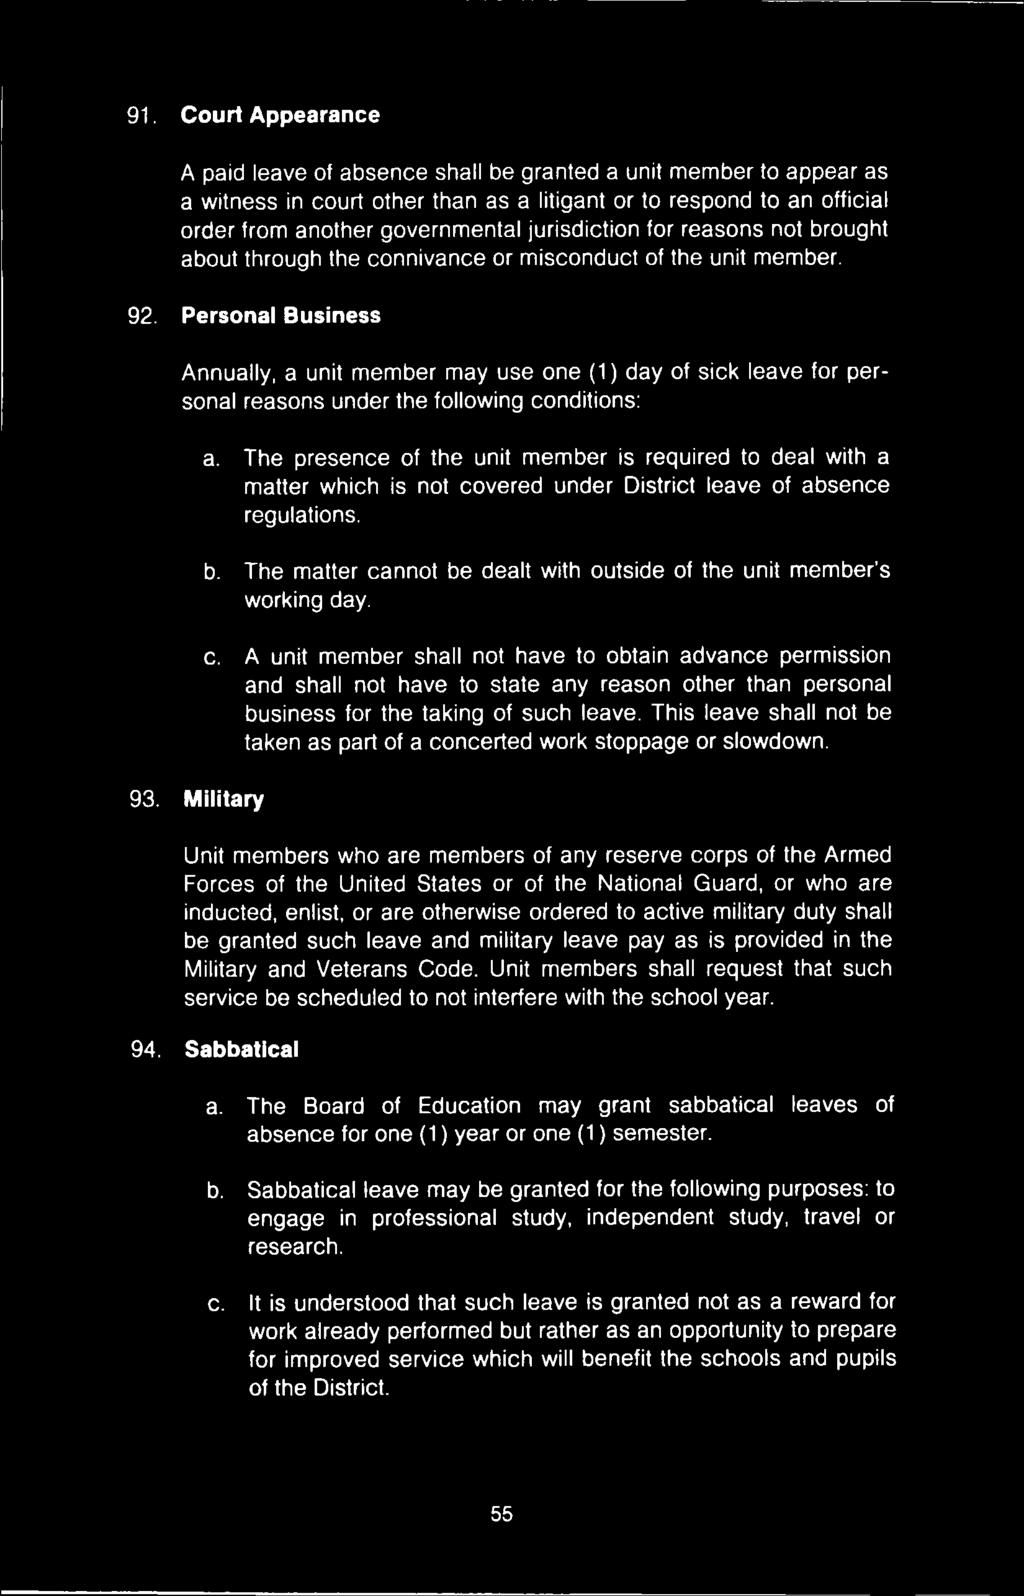 Personal Business Annually, a unit member may use one (1) day of sick leave for personal reasons under the following conditions: 93. Military a.